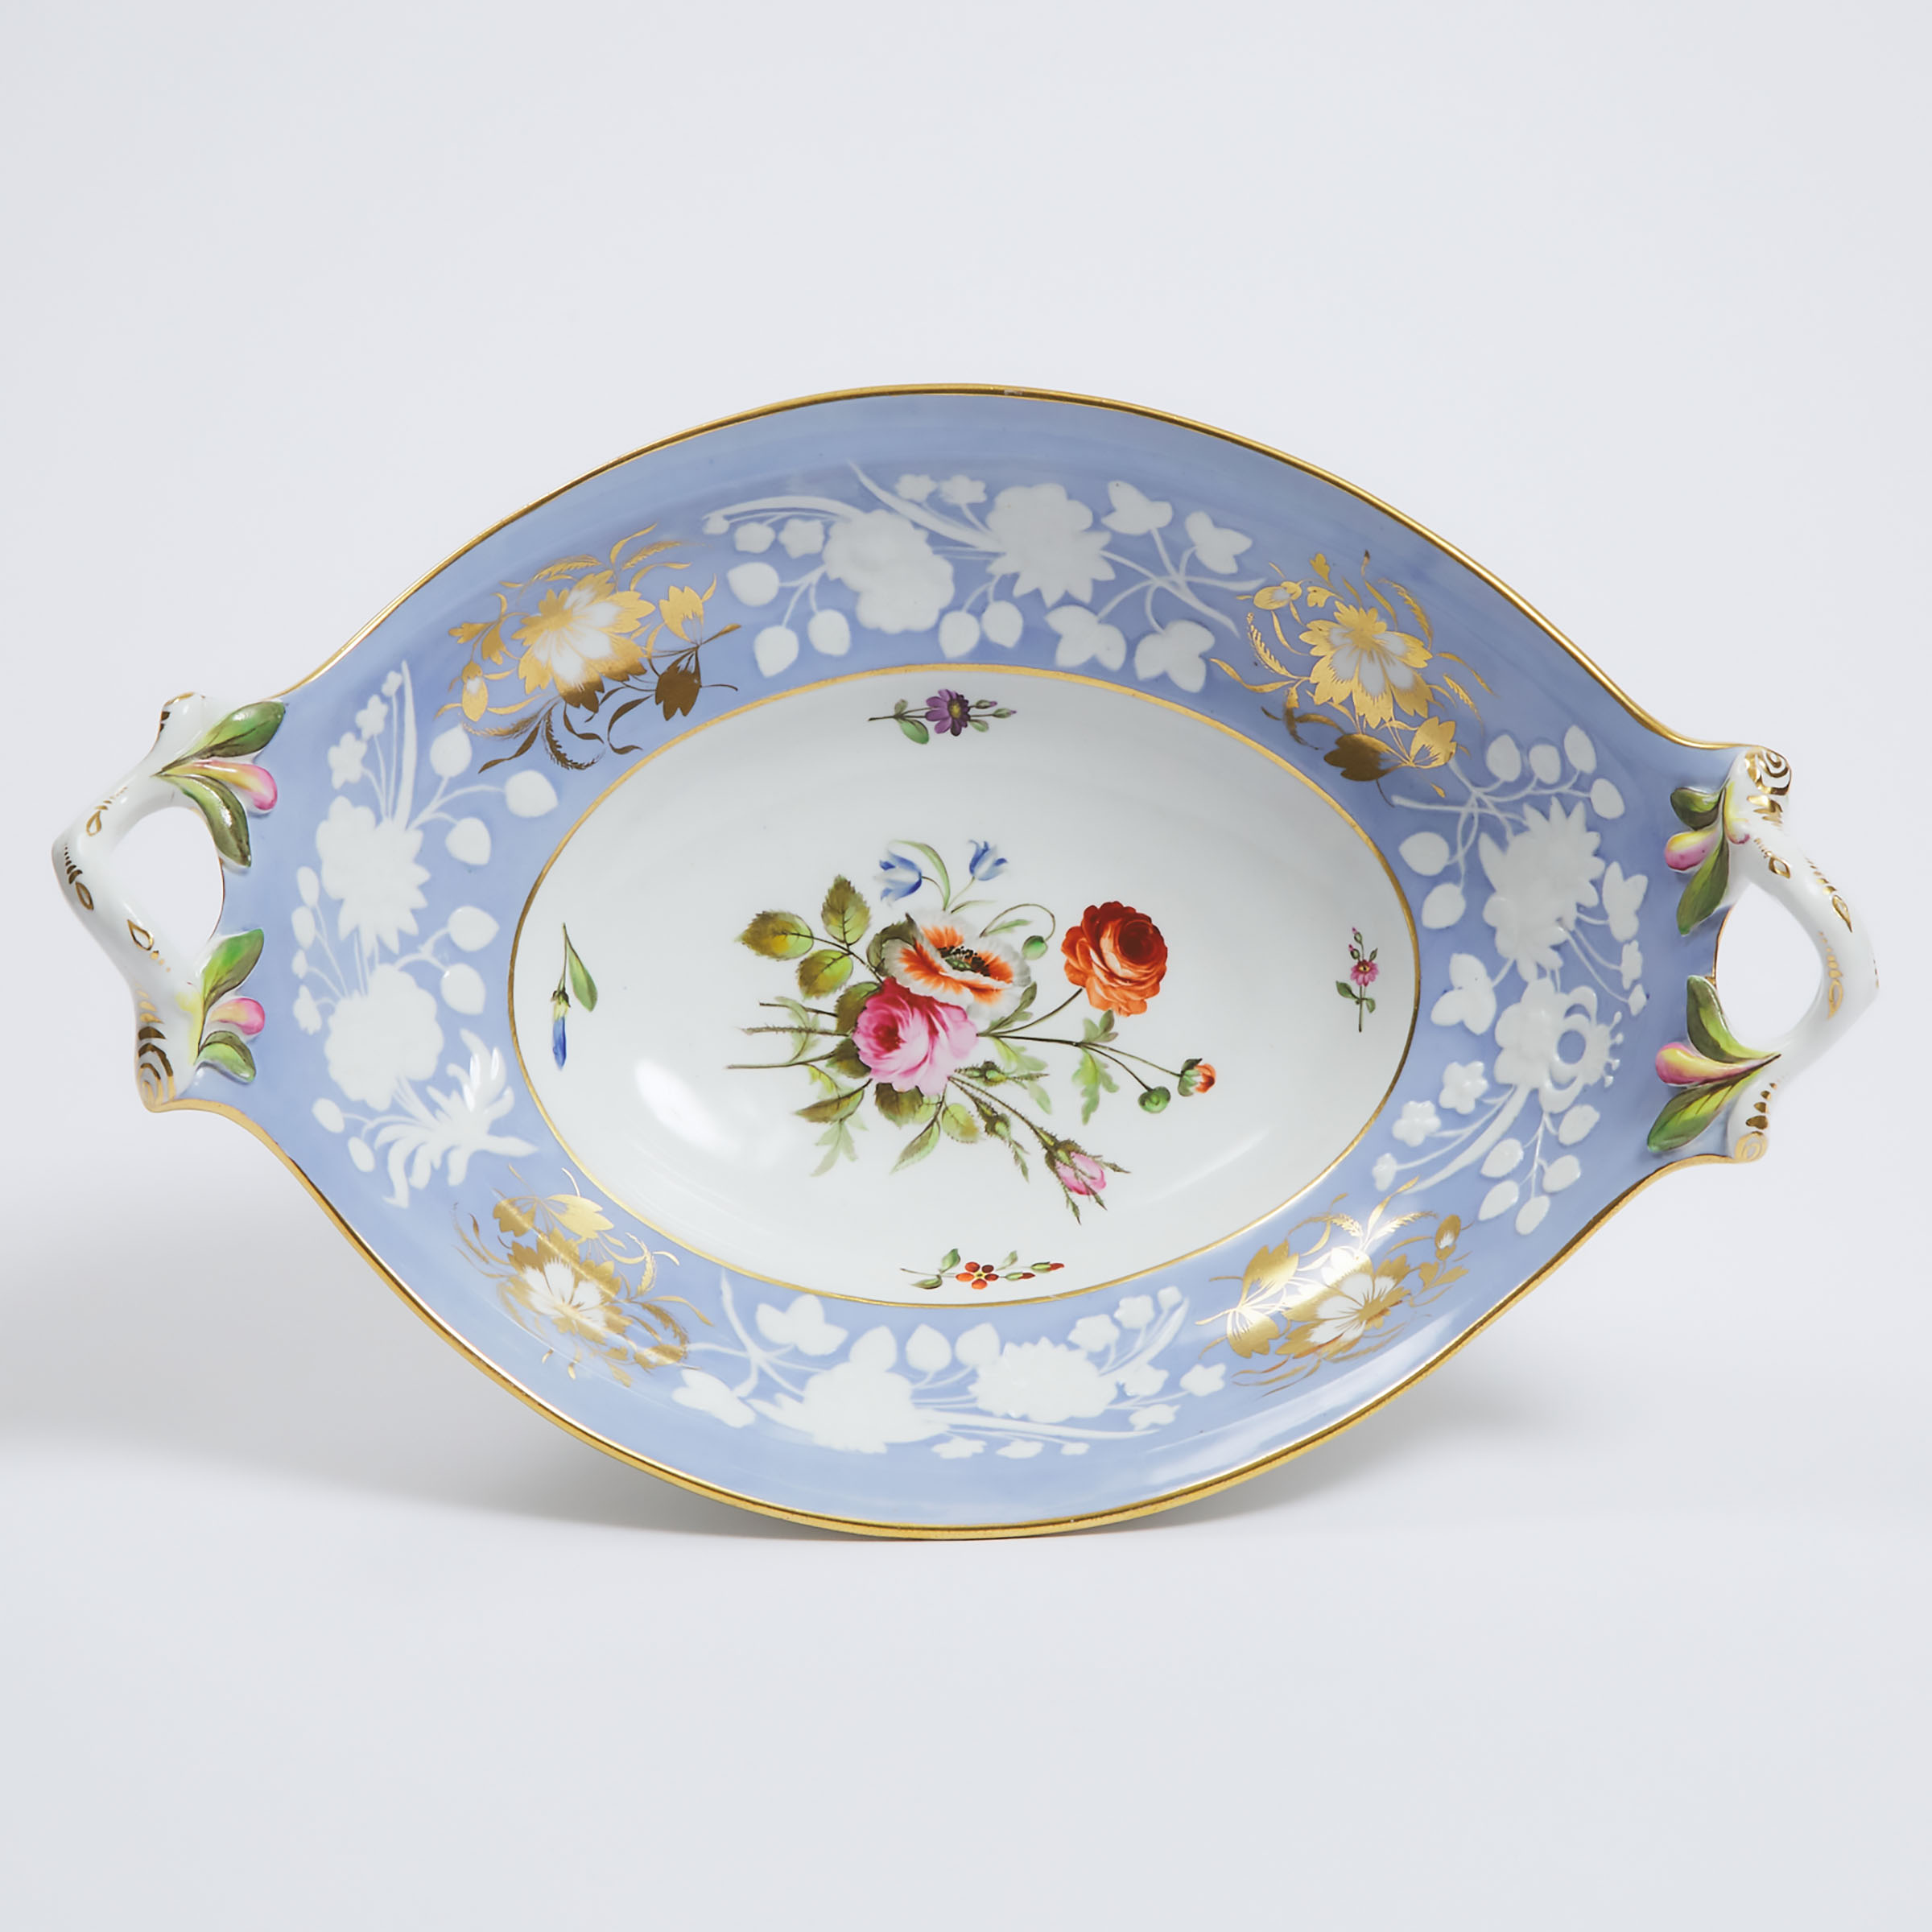 Spode Lilac Ground Oval Footed Comport and a Pair of Hexagonal Dishes, c.1815-20